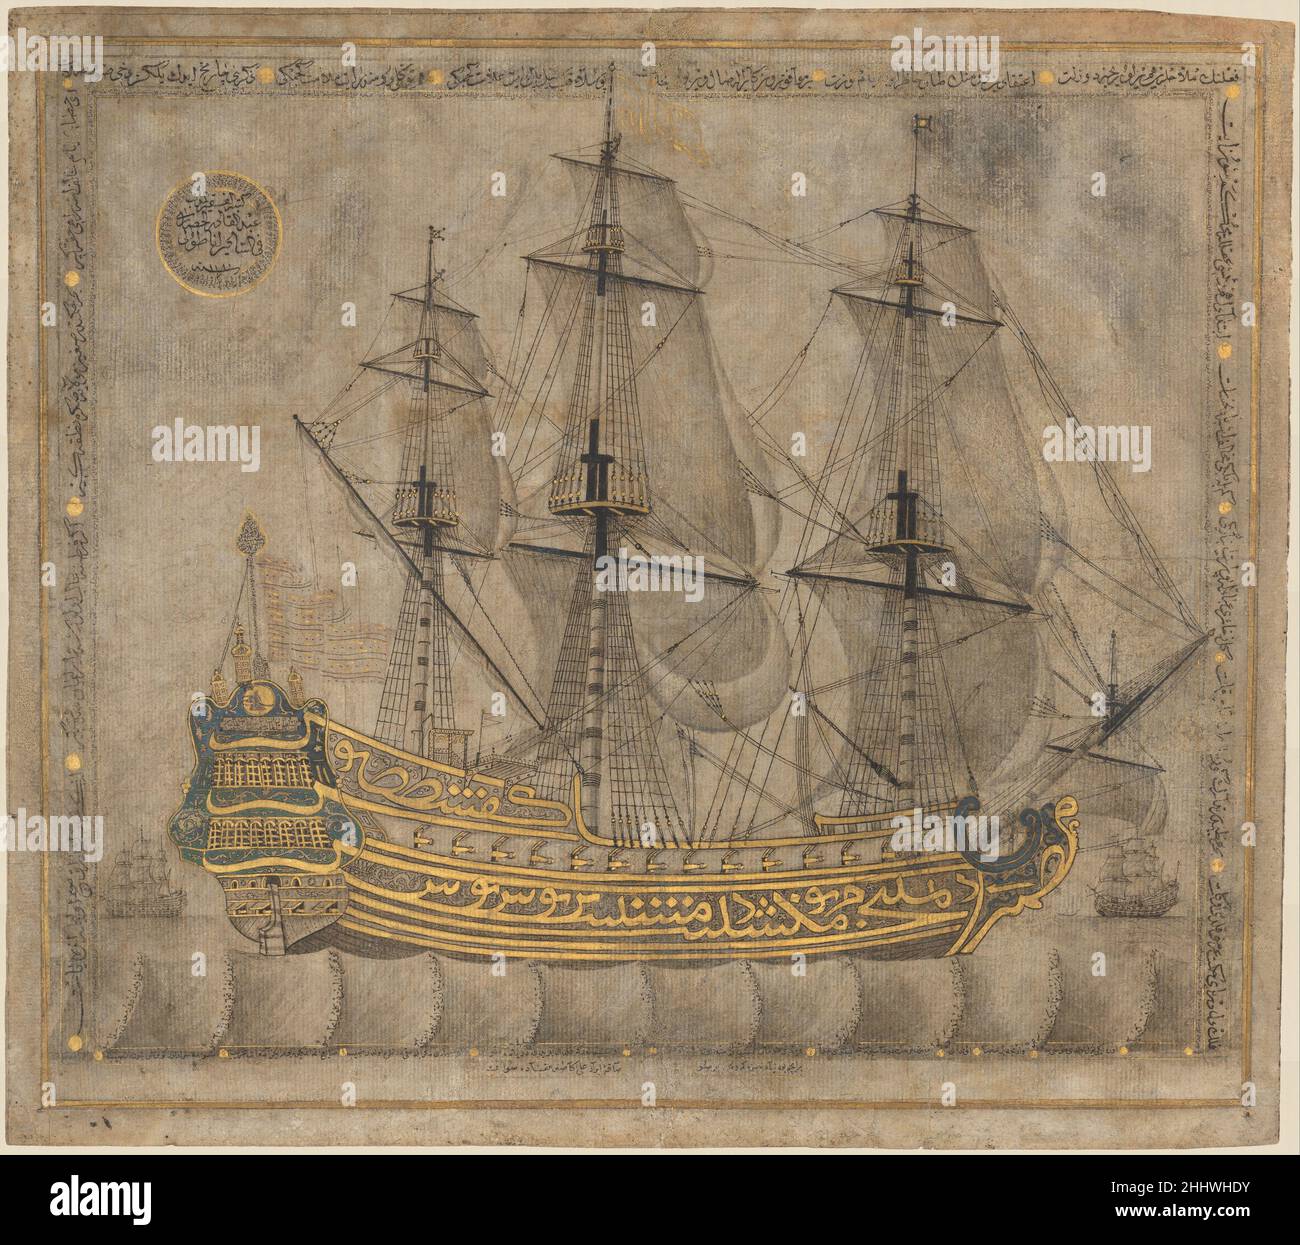 Calligraphic Galleon dated A.H. 1180/ A.D. 1766–67 'Abd al-Qadir Hisari The hull of this sailing ship comprises the names of the Seven Sleepers and their dog. The tale of the Seven Sleepers, found in pre-Islamic Christian sources, concerns a group of men who sleep for centuries within a cave, protected by God from religious persecution. Both hadith (sayings of the Prophet), and tafsir (commentaries on the Qur'an) suggest that these verses from the Qur'an have protective qualities.. Calligraphic Galleon  454611 Stock Photo